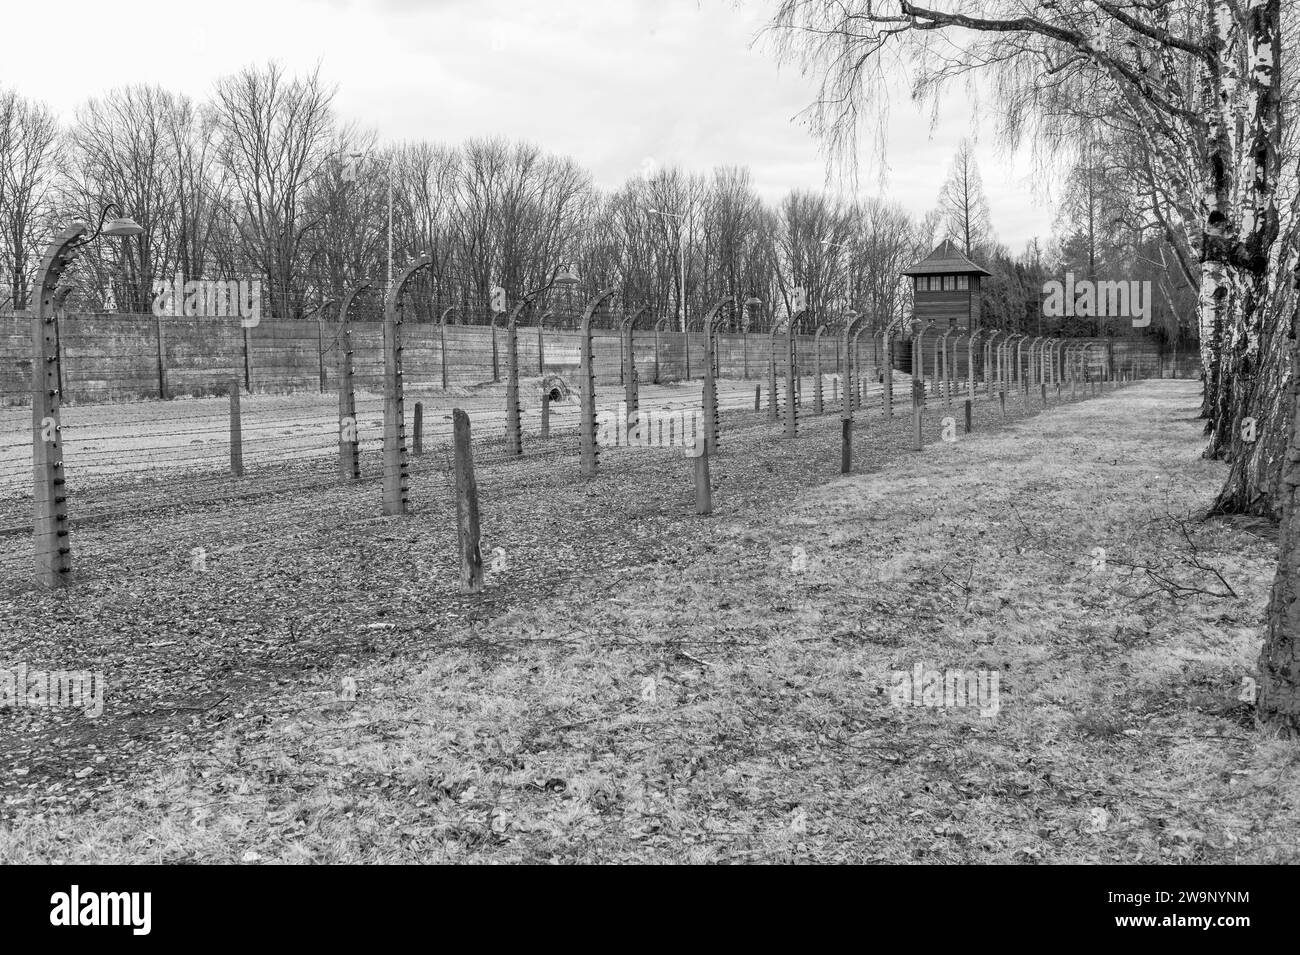 Perimeter fences and barriers with watch tower and electrified fencing at Auschwitz concentration camp Stock Photo